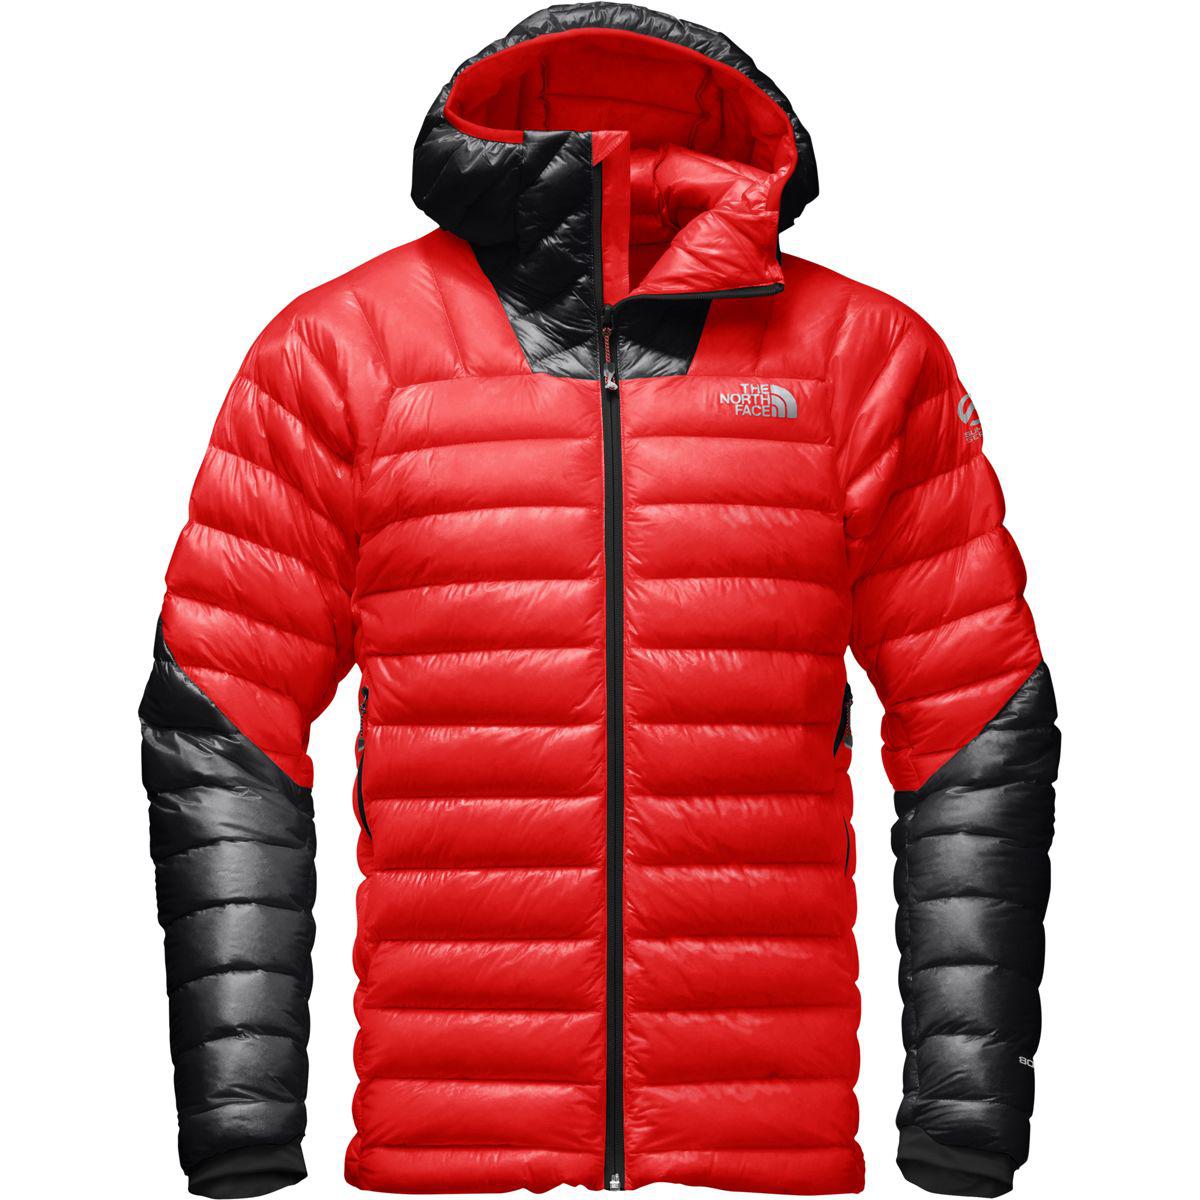 The North Face Synthetic Summit L3 Hooded Down Jacket in Red for Men - Lyst